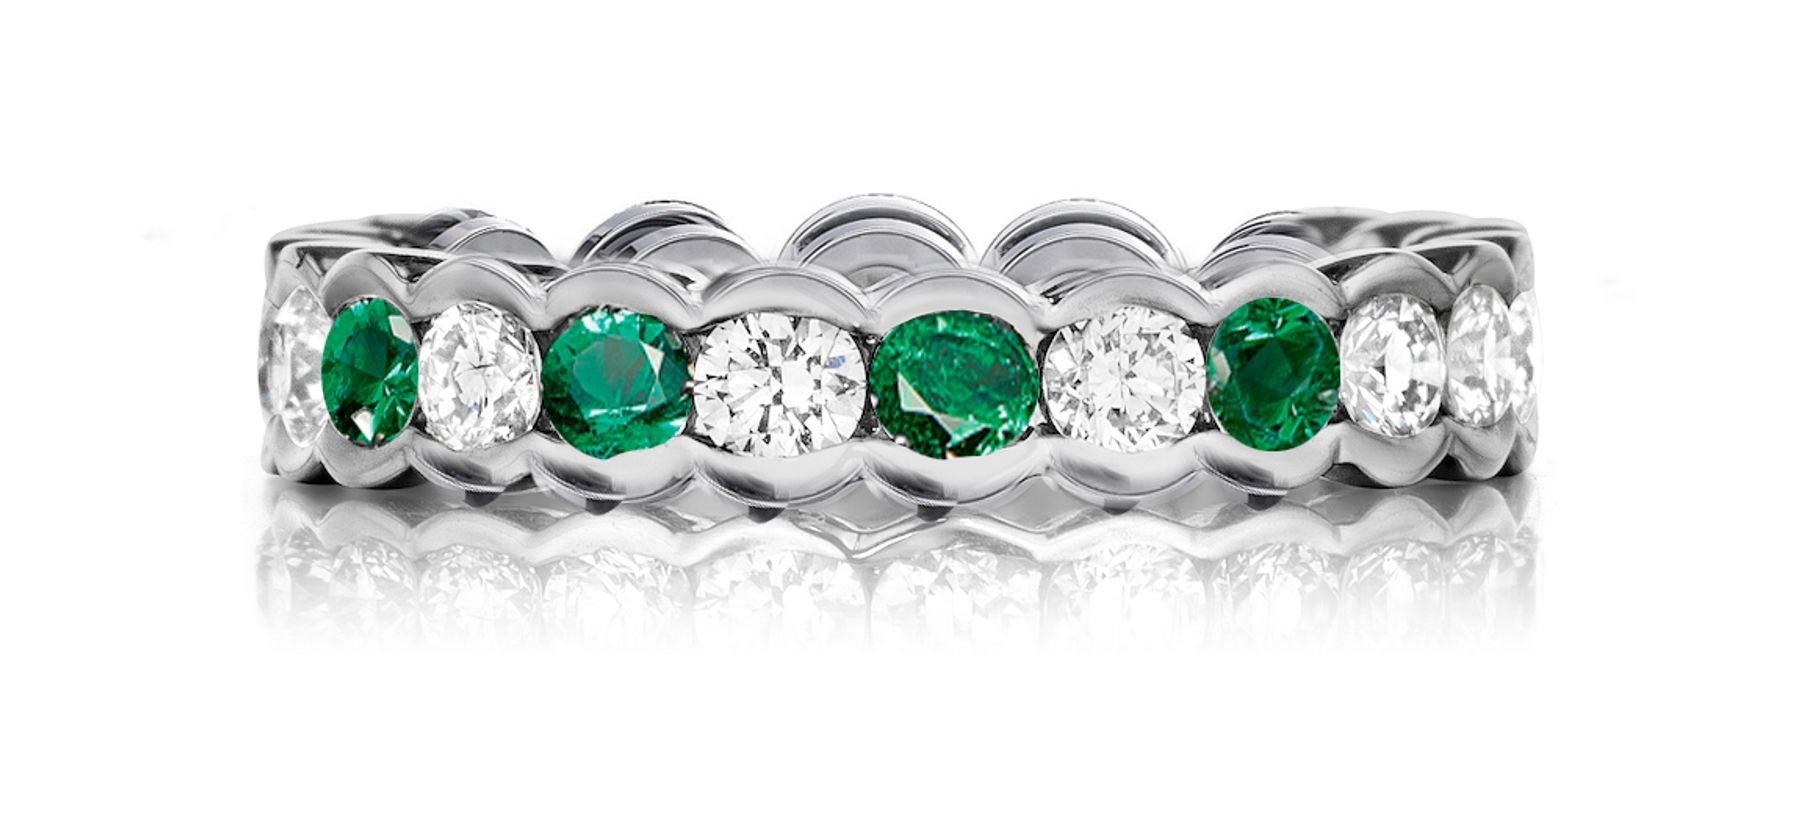 Expertly Crafted Precision Set High Quality Diamond & Emerald Eternity Band Rings